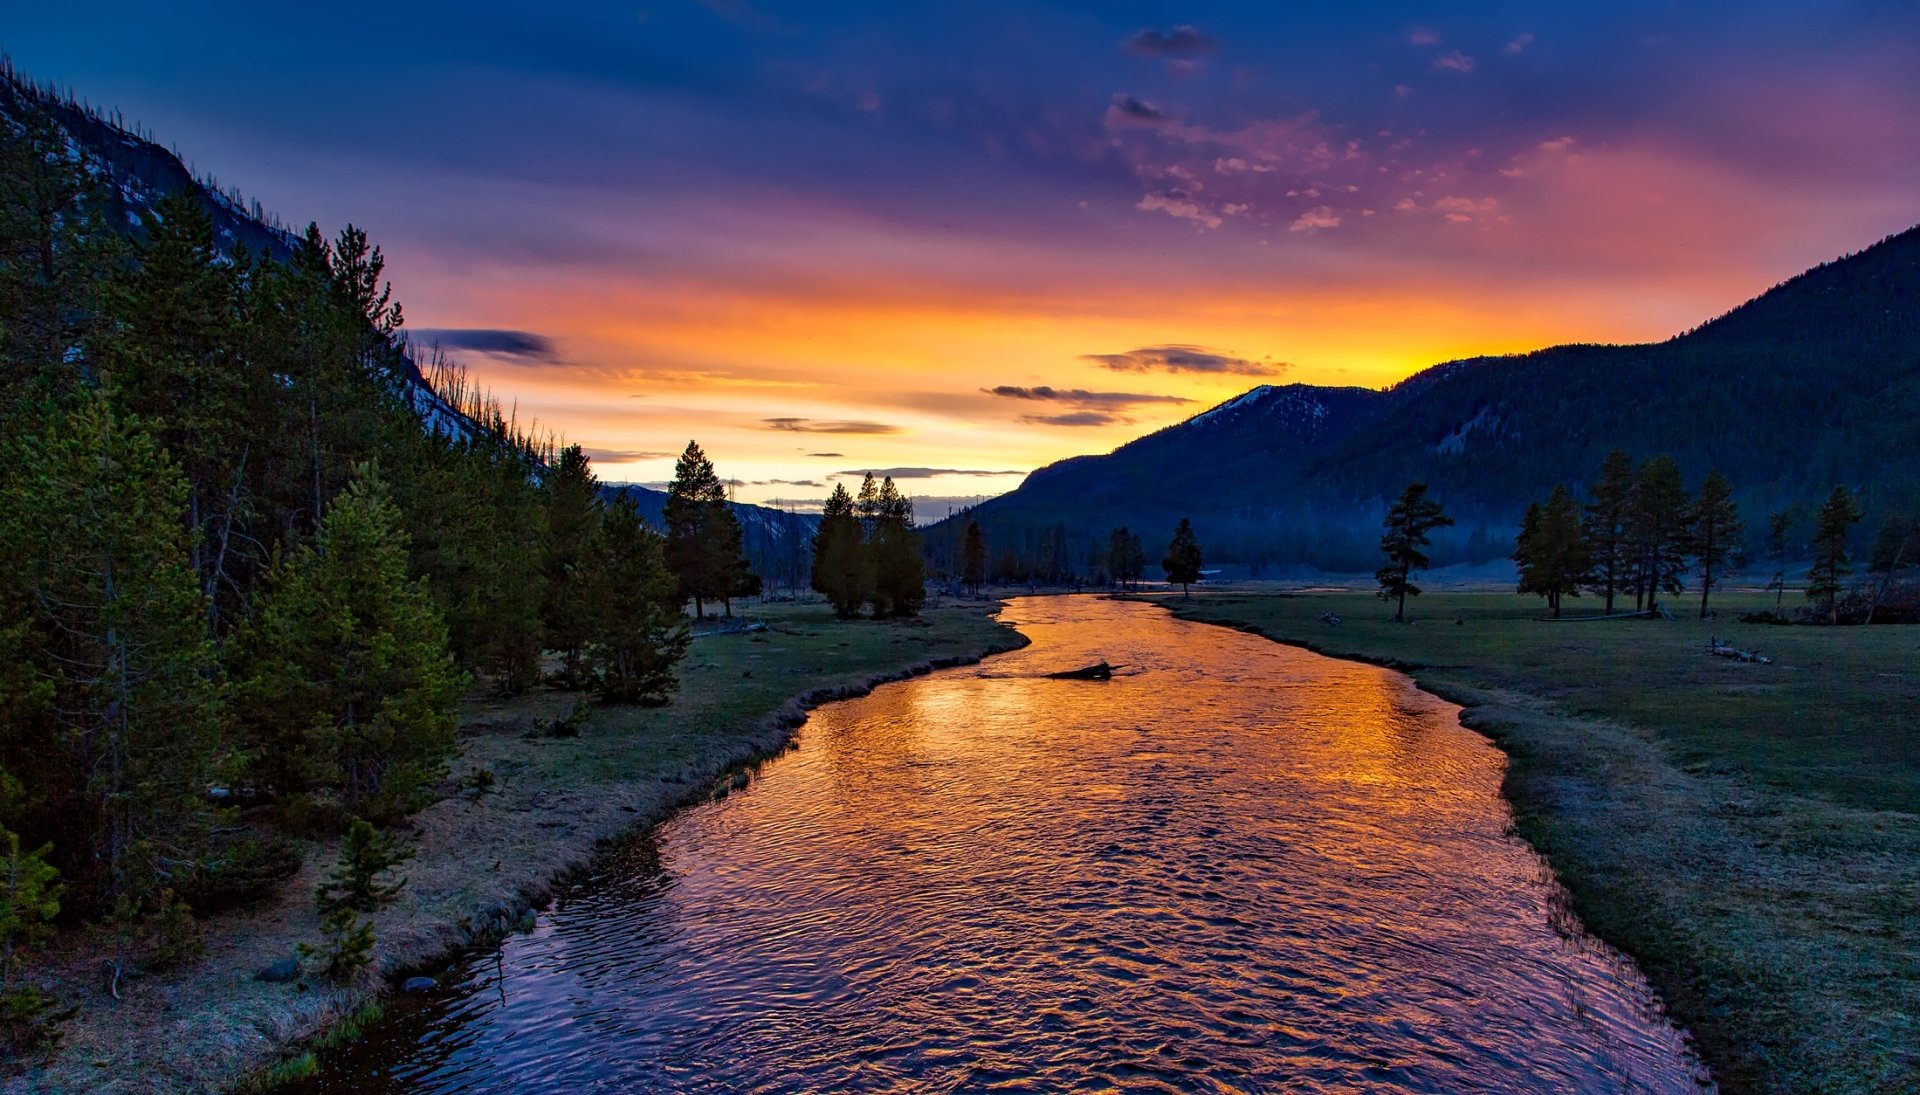 Download Wilderness Scenic Mountain Tree Nature Dusk USA Twilight HDR River Sunset National Park Yellowstone National Park  HD Wallpaper by 12019